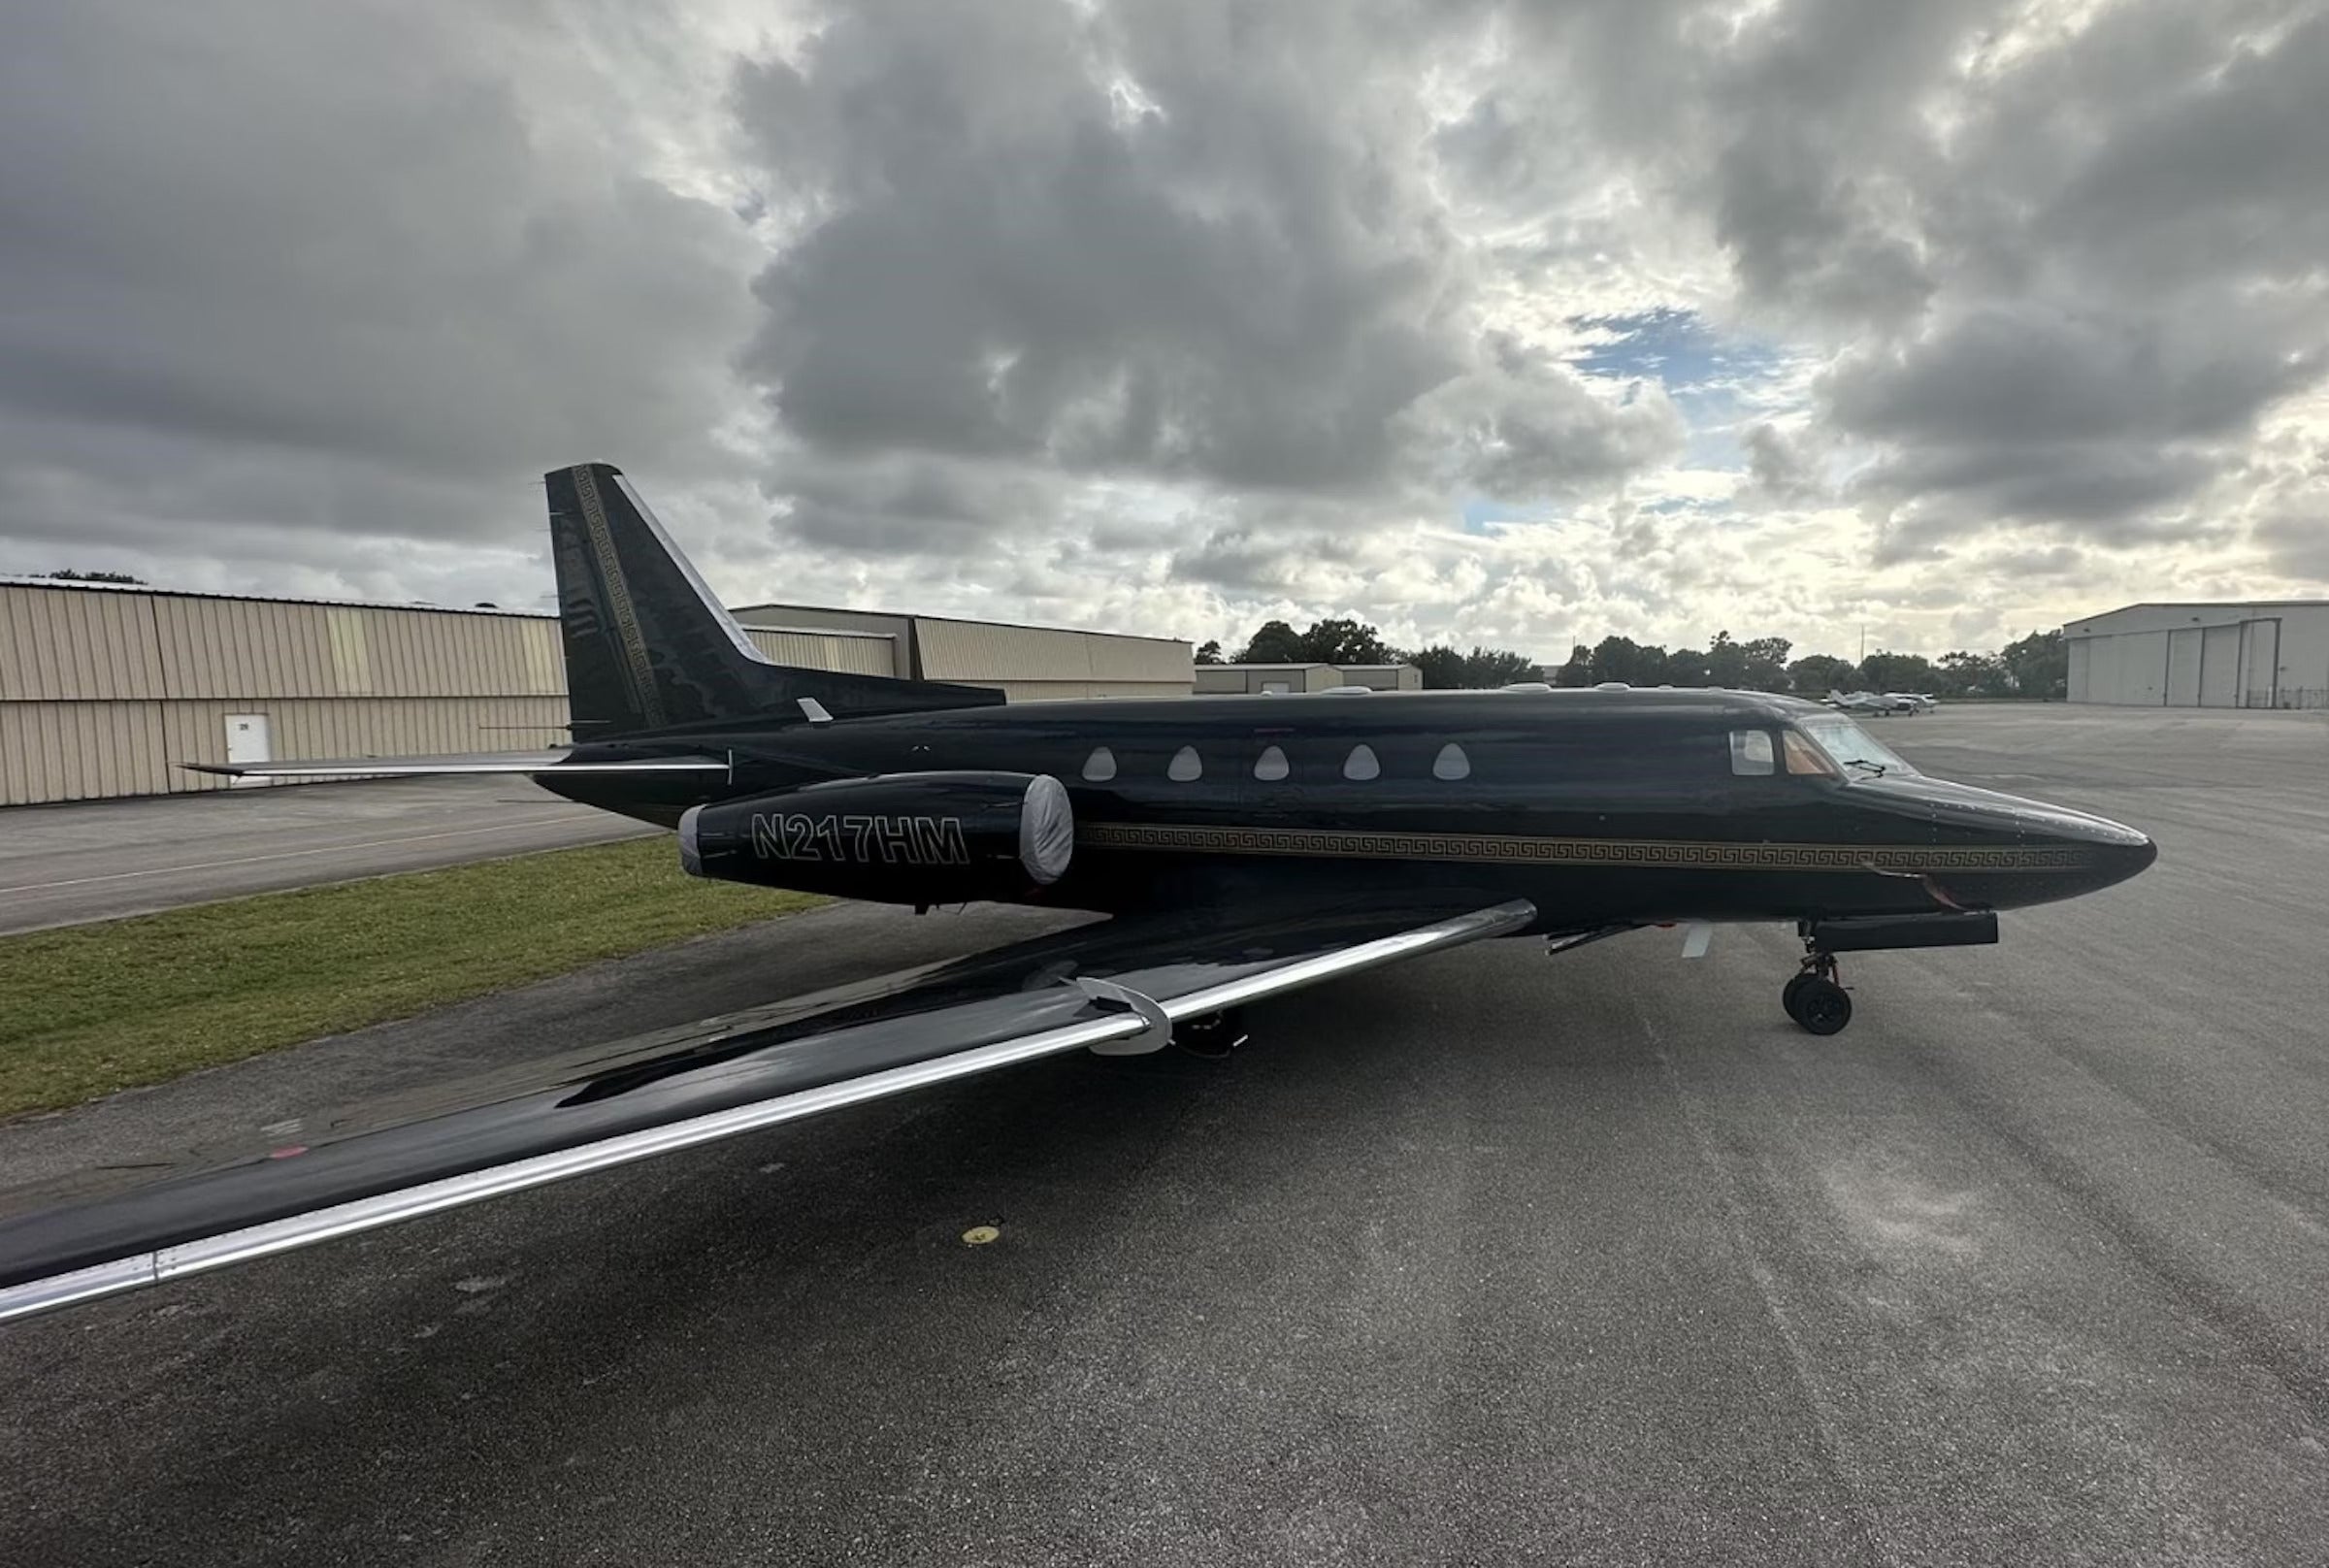 This 1980 North American Sabreliner Is a Fast, Stylish ‘AircraftForSale’ Top Pick